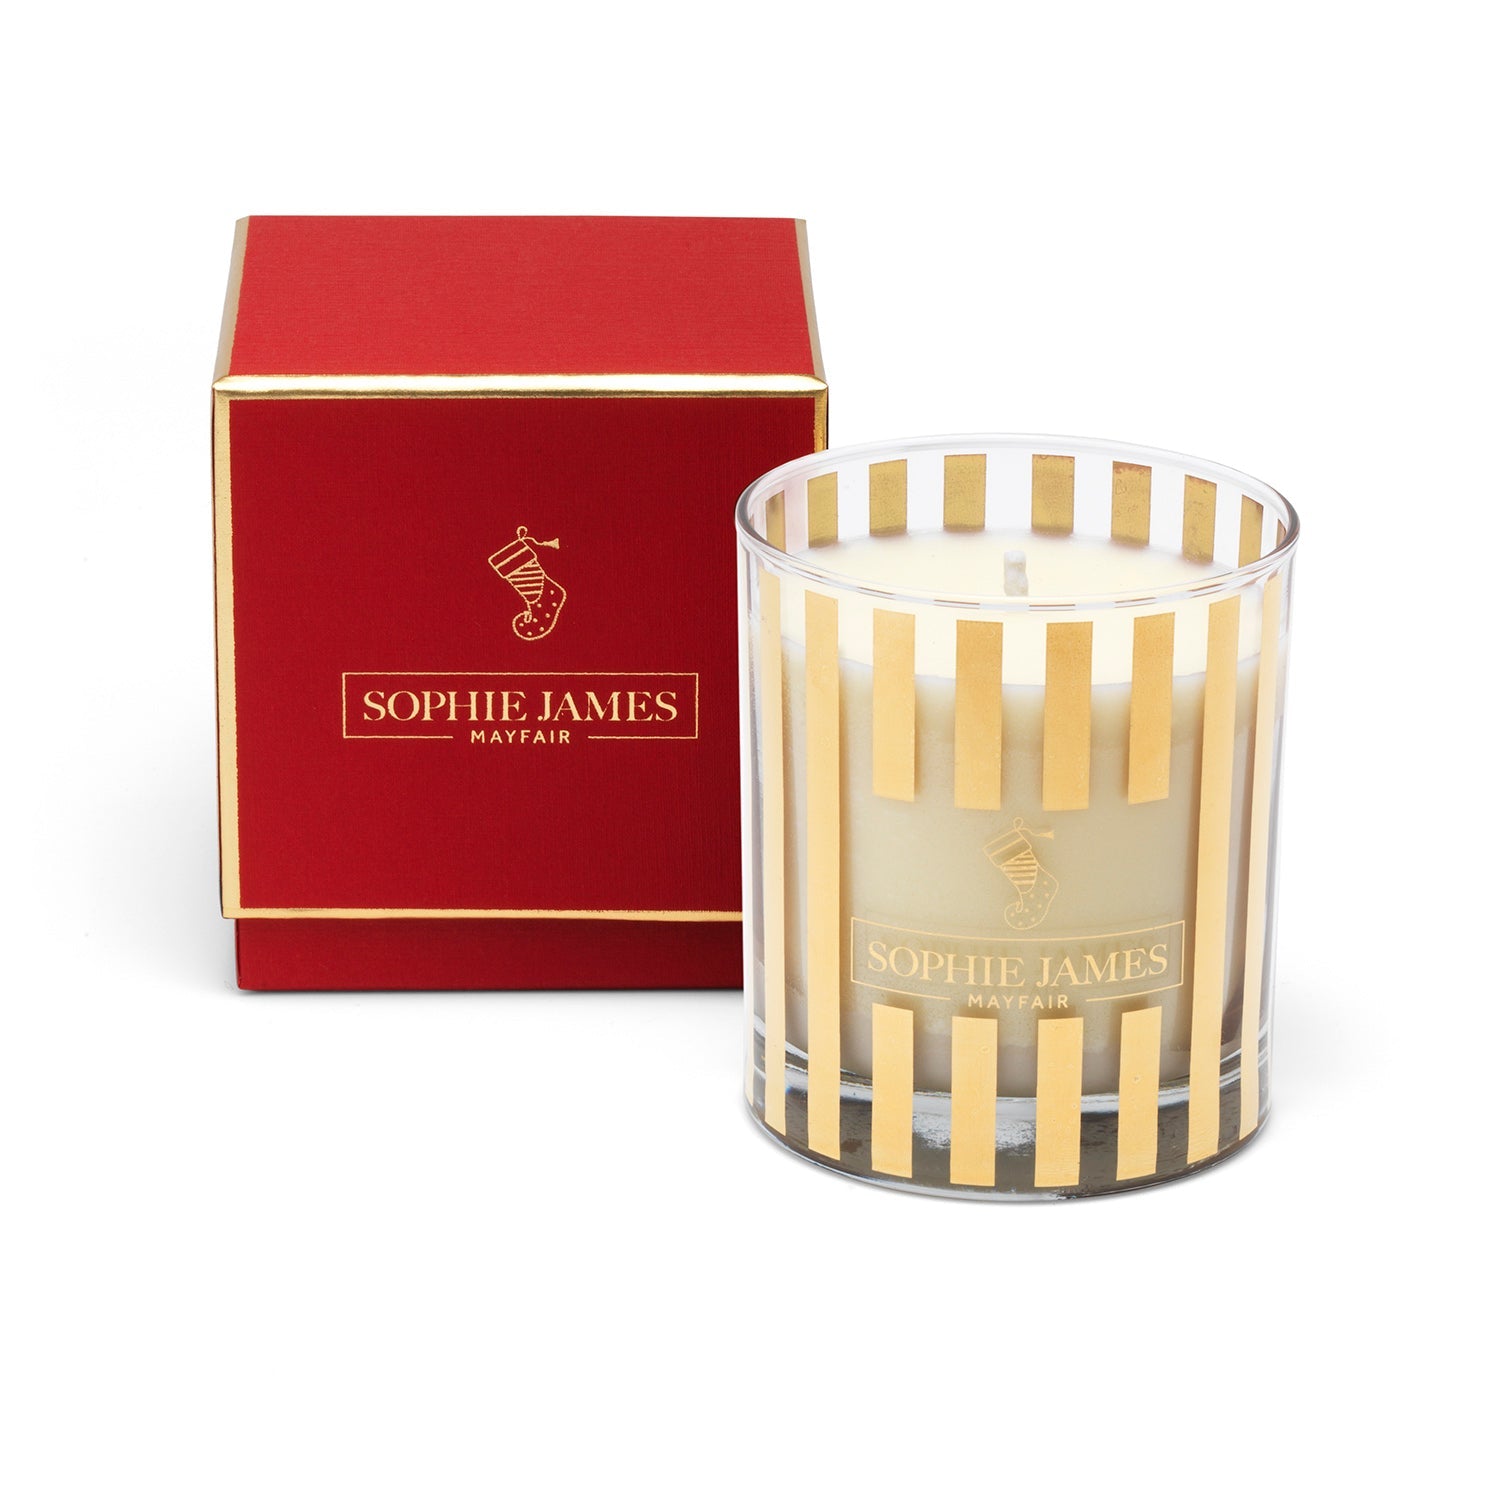 The Christmas Stocking Candle by Sophie James